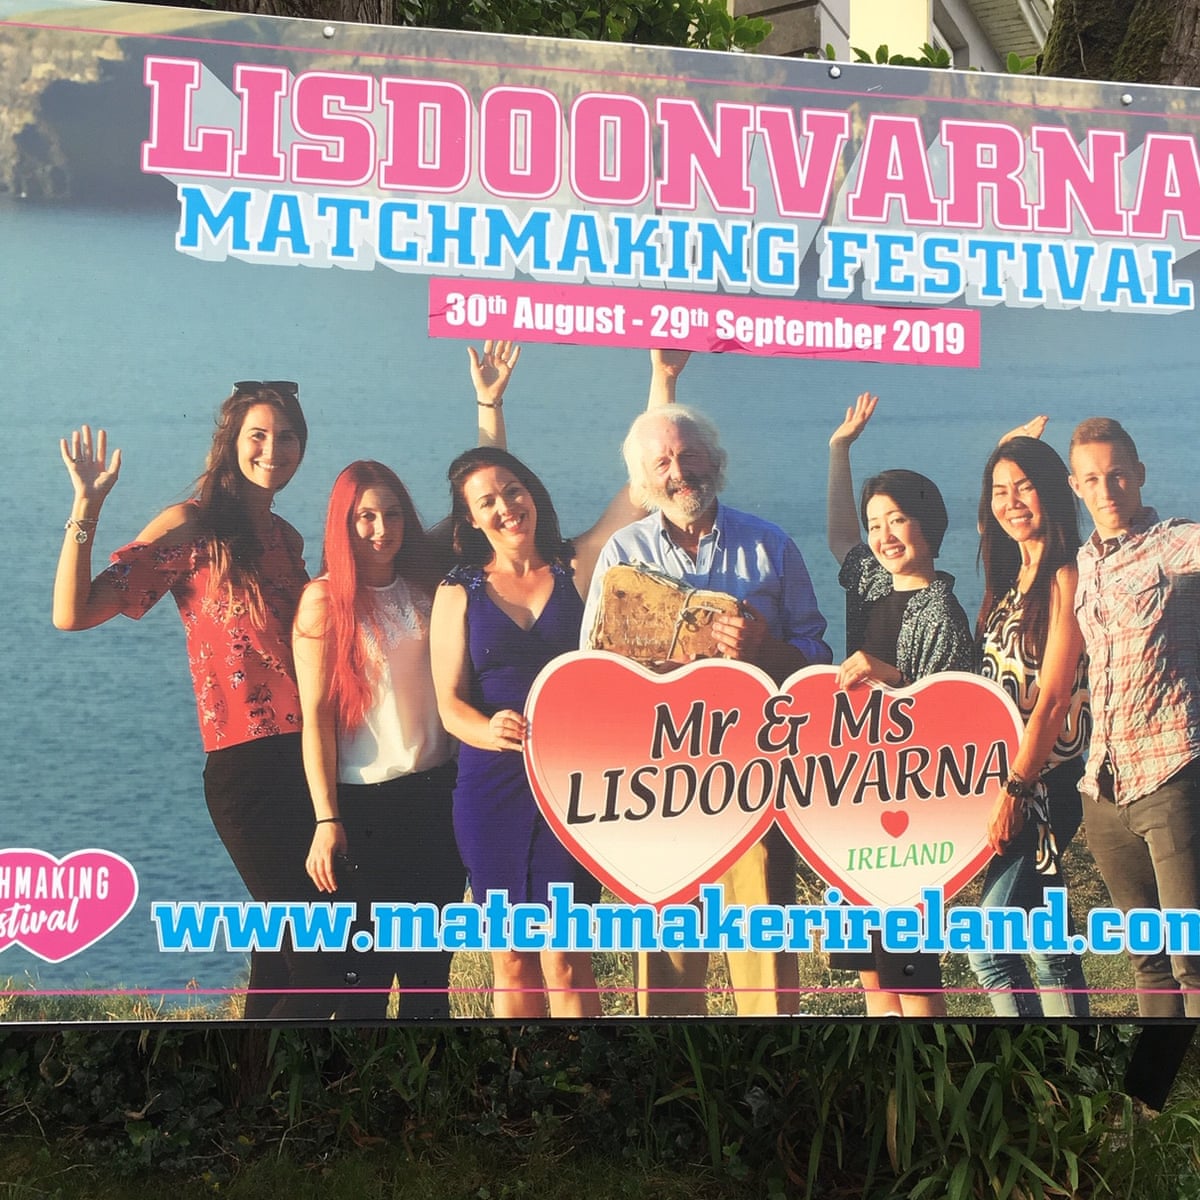 matchmaking roscommon Archives - TWOS COMPANY